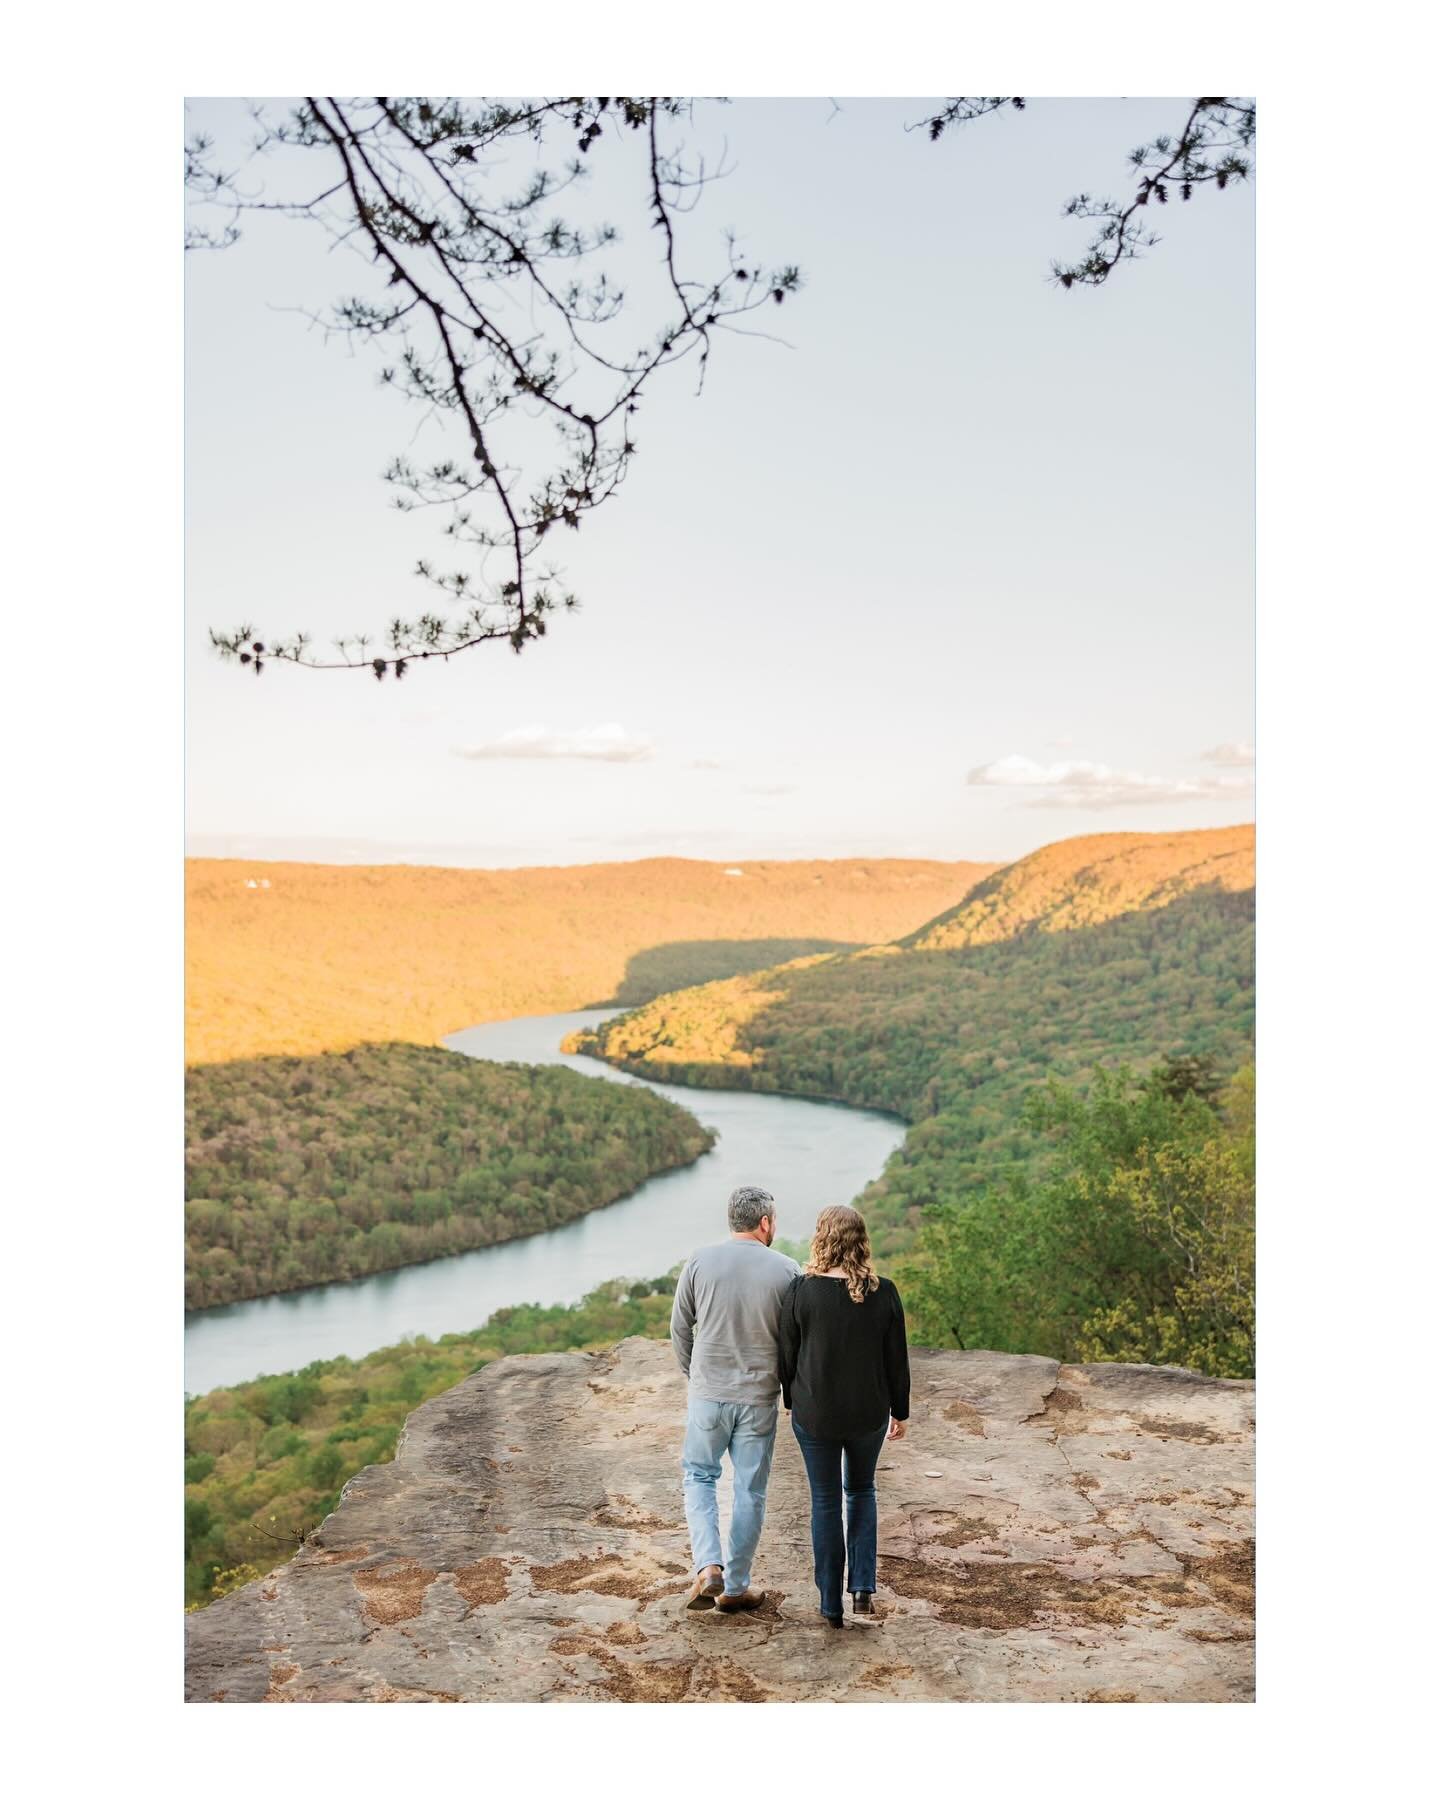 Krysia + Derek&rsquo;s engagement session was stunning! The sun setting on the mountains and the love they share were beautiful to document. I can&rsquo;t wait for their elopement in May!